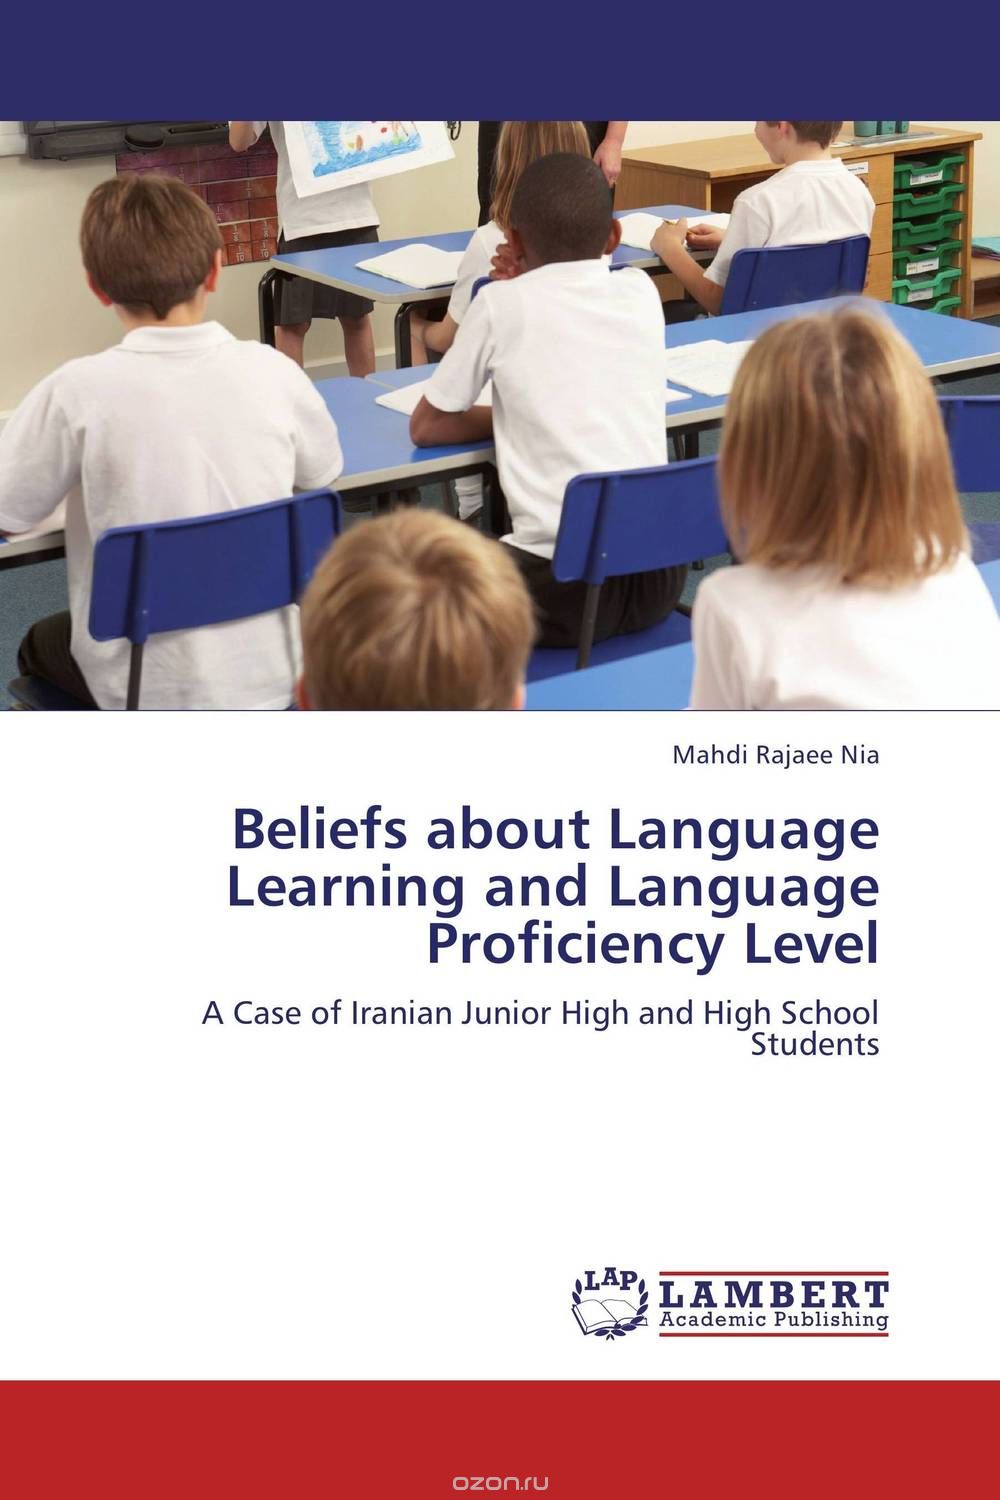 Beliefs about Language Learning and Language Proficiency Level